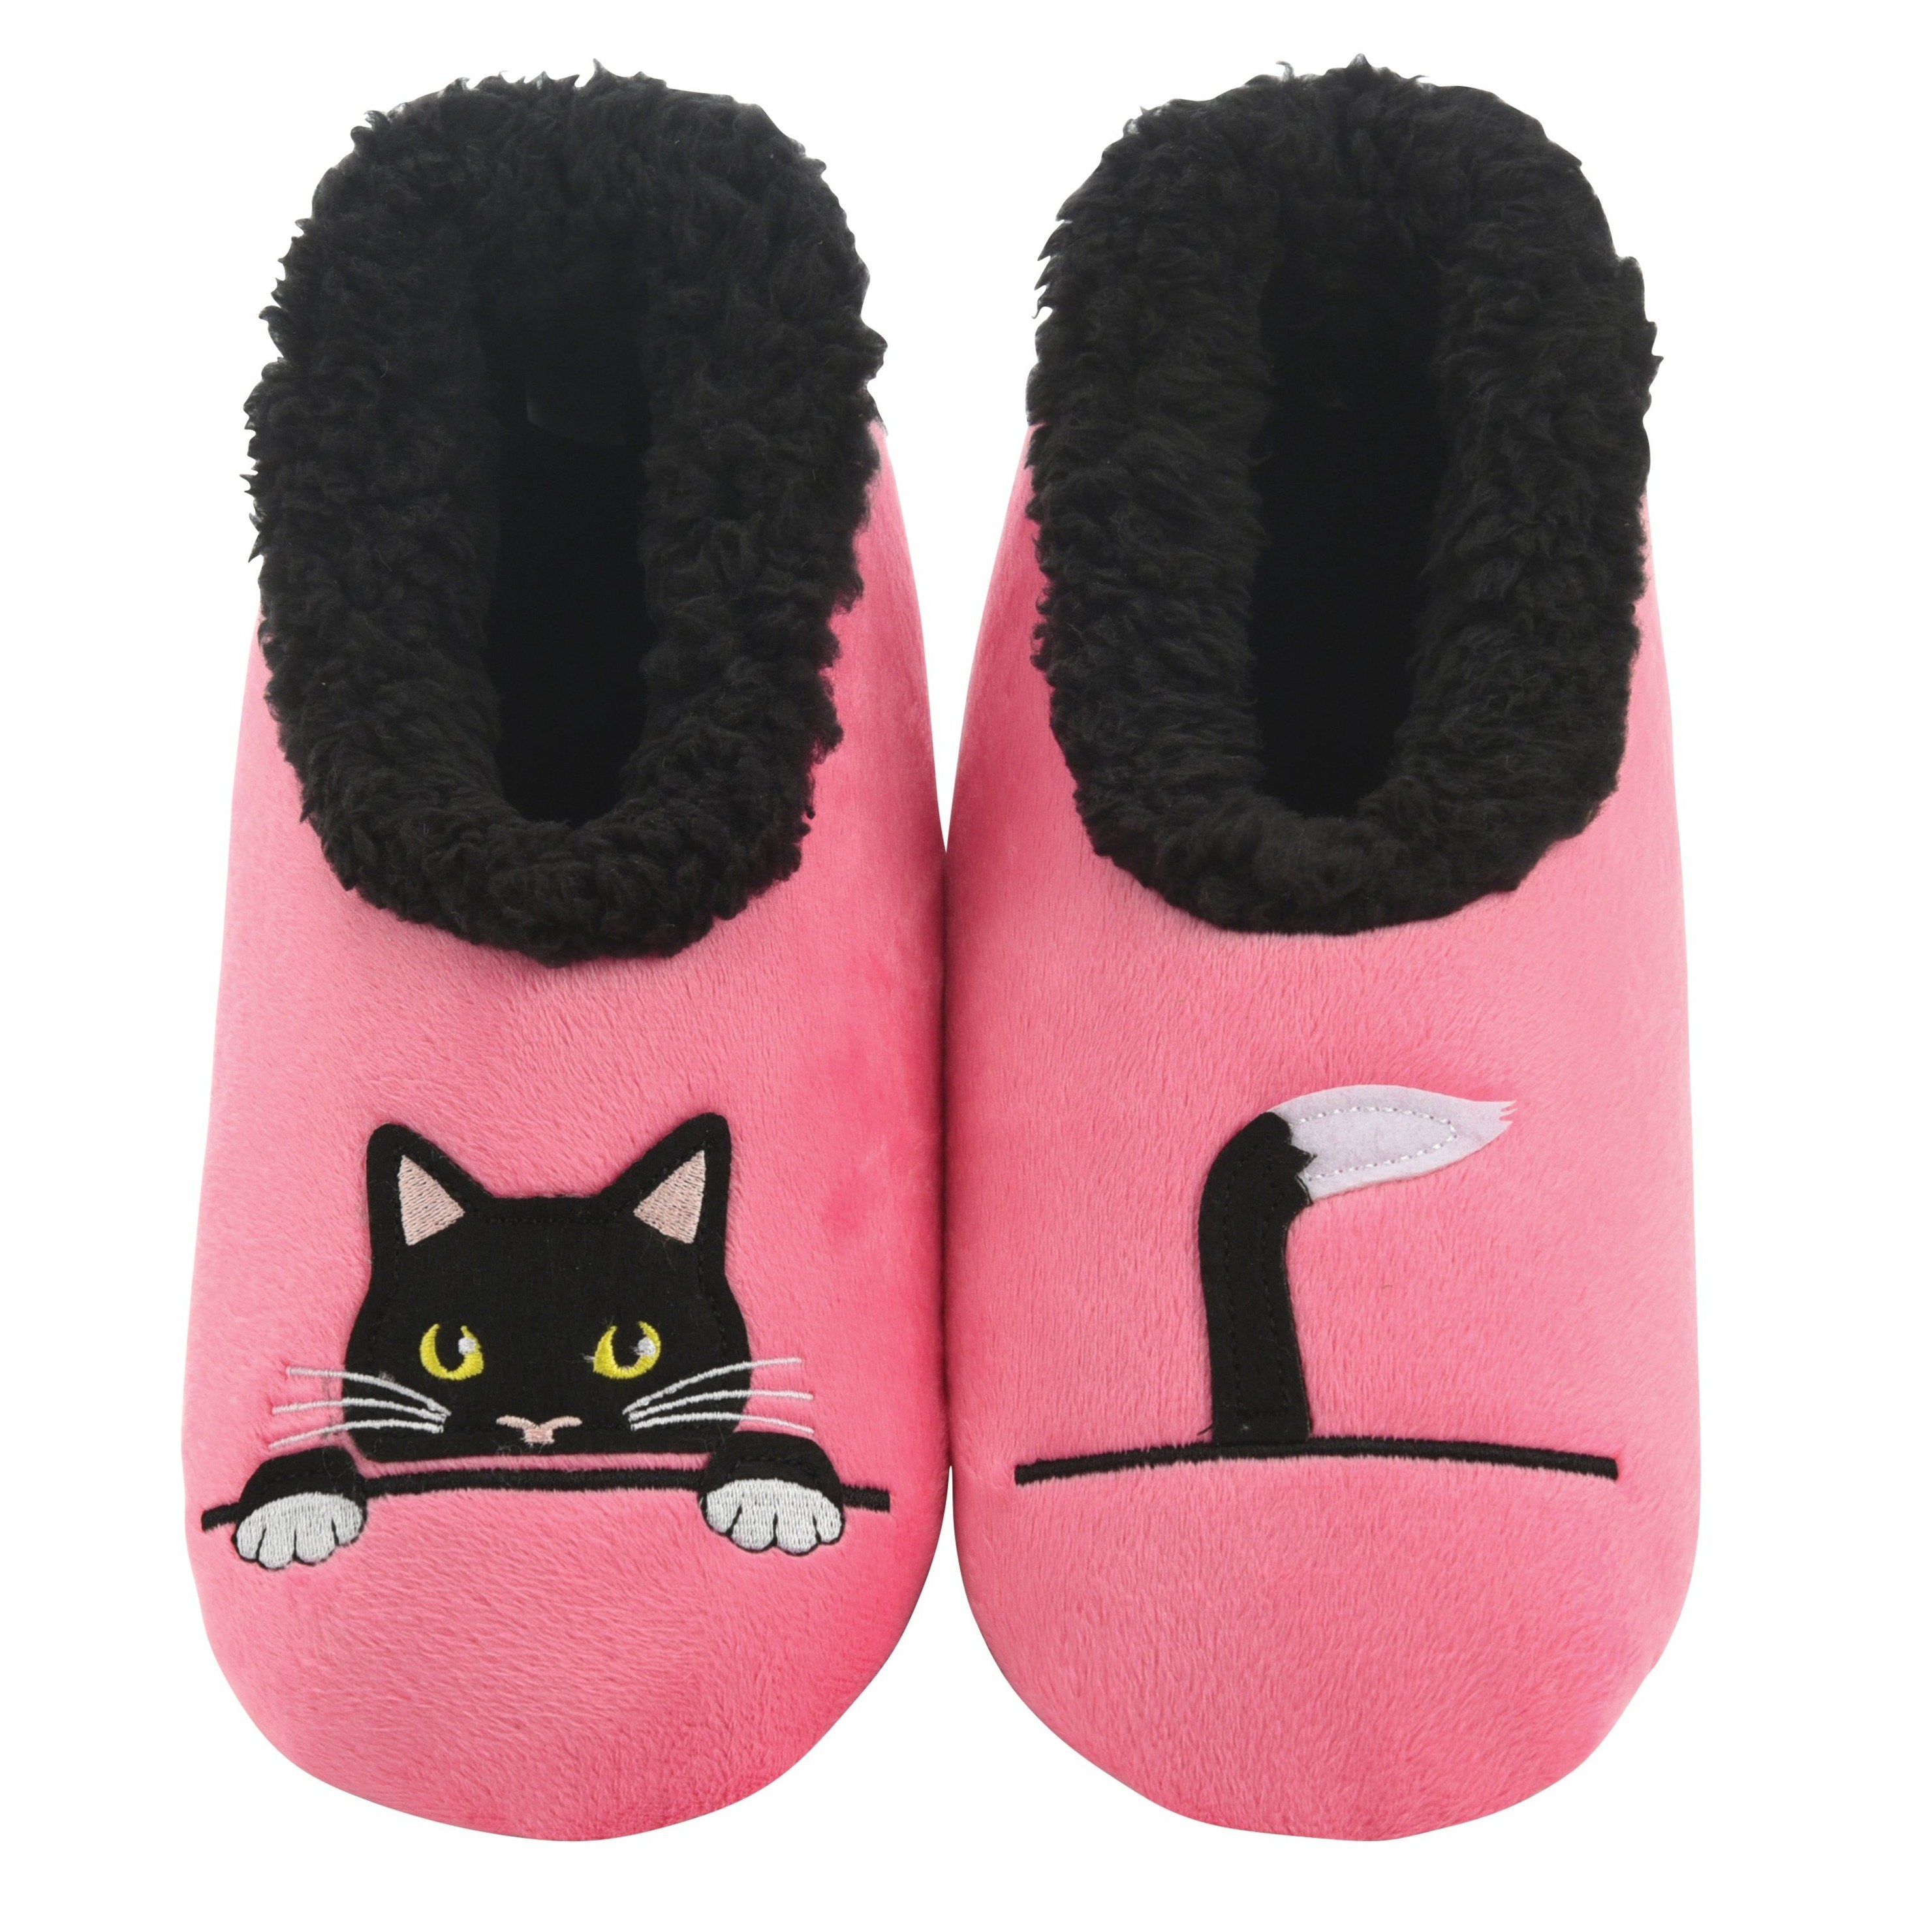 Cat Lover Gifts, Slippers With Cats On Them, Womens Cat Slippers